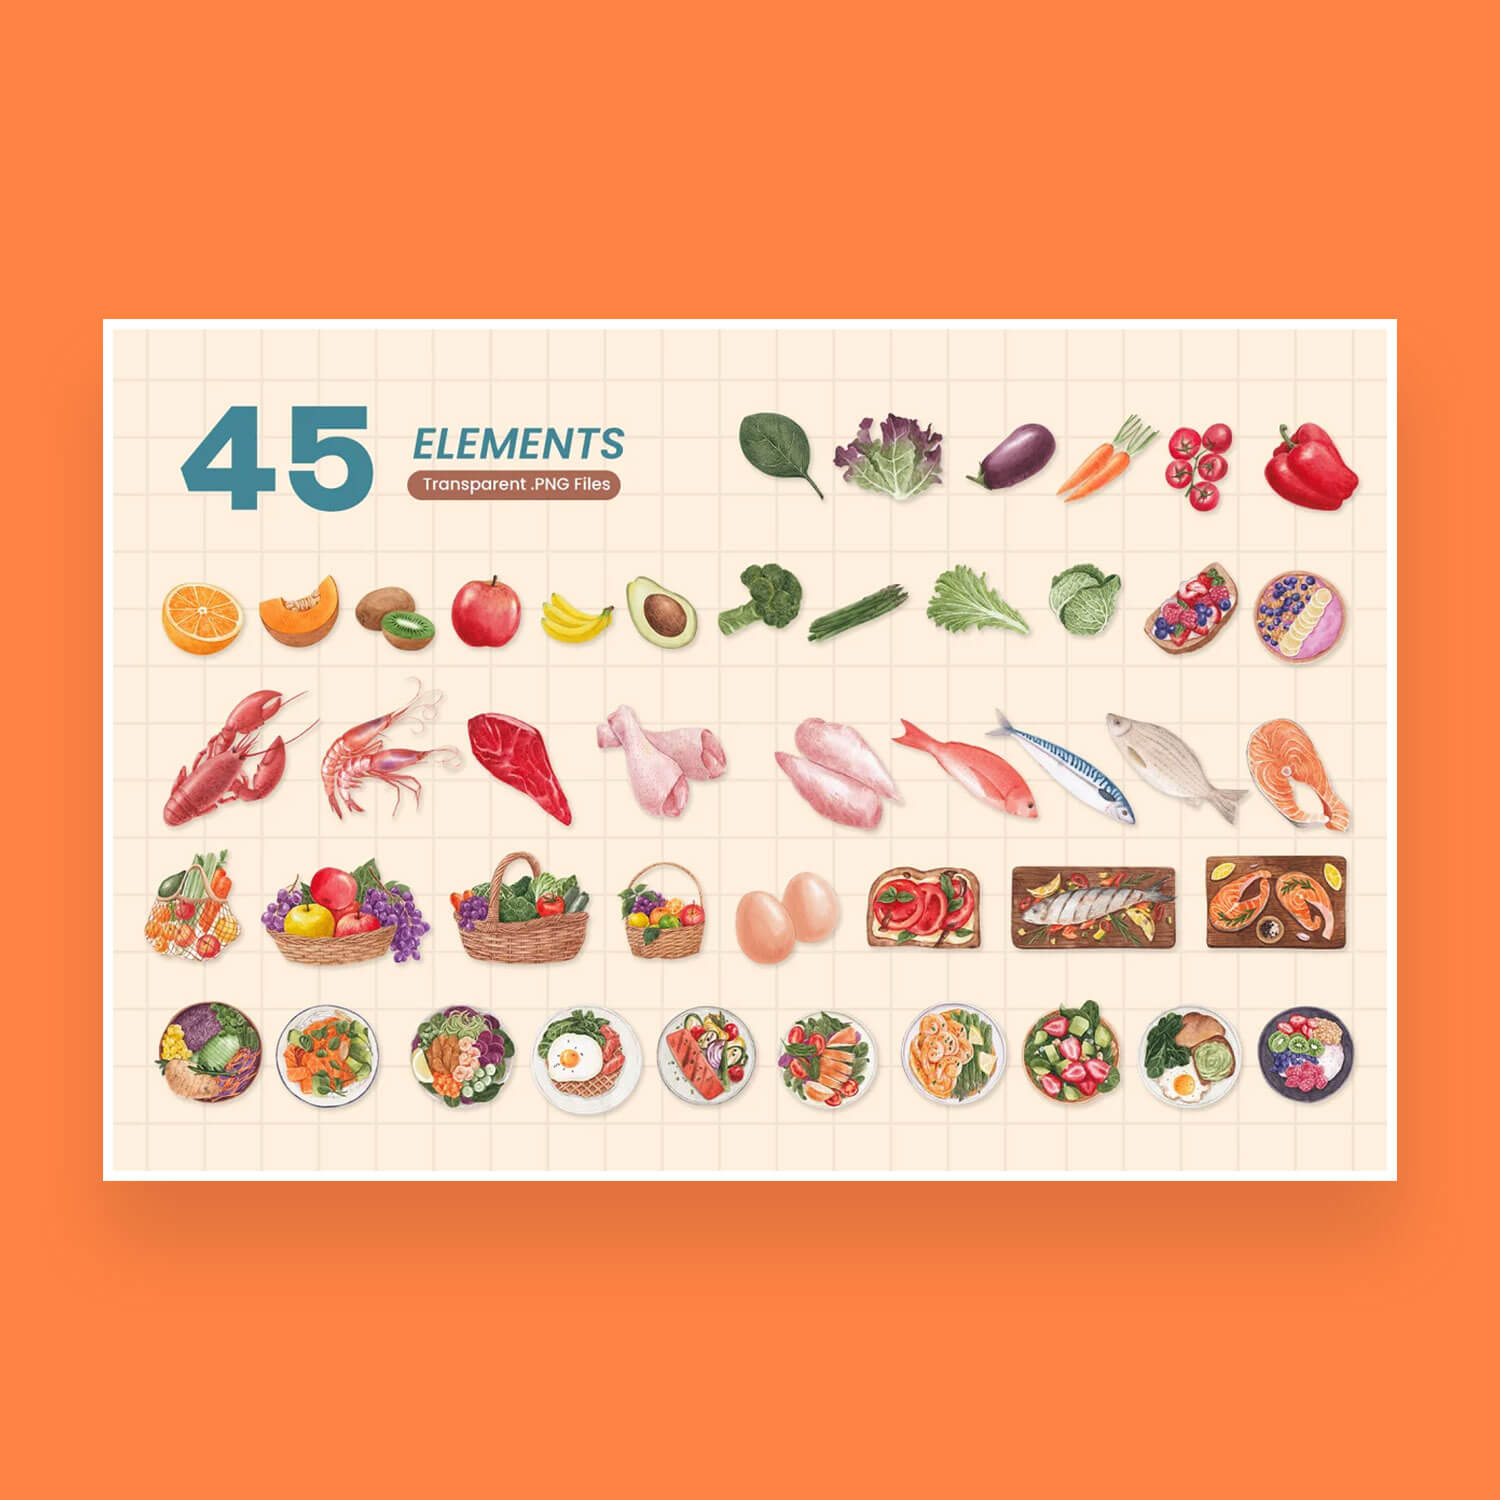 Healthy Food 45 Elements: Vegetables, fruits, fish, meat, poultry, seafood.